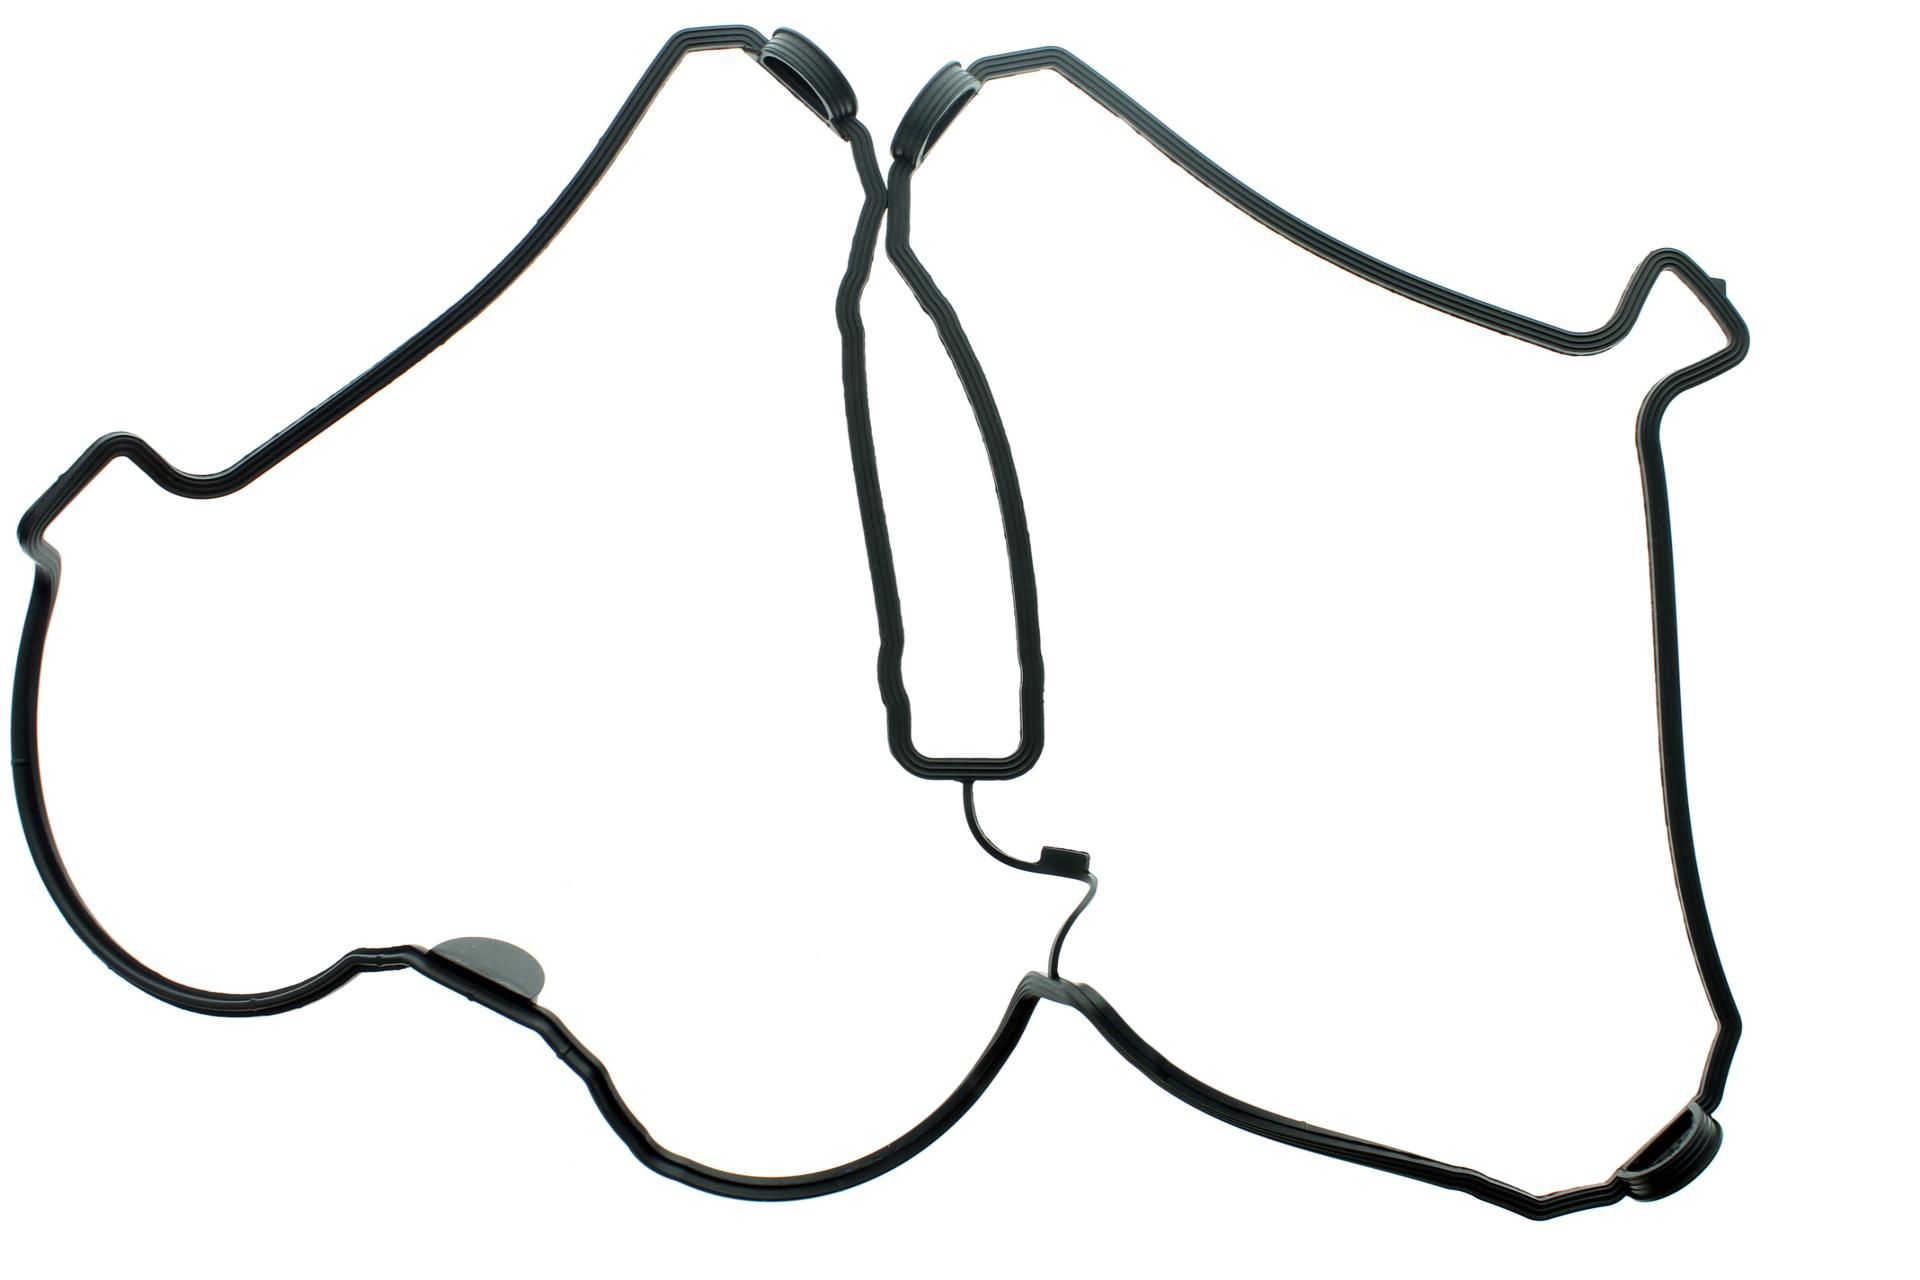 4SV-11193-00-00 HEAD COVER GASKET